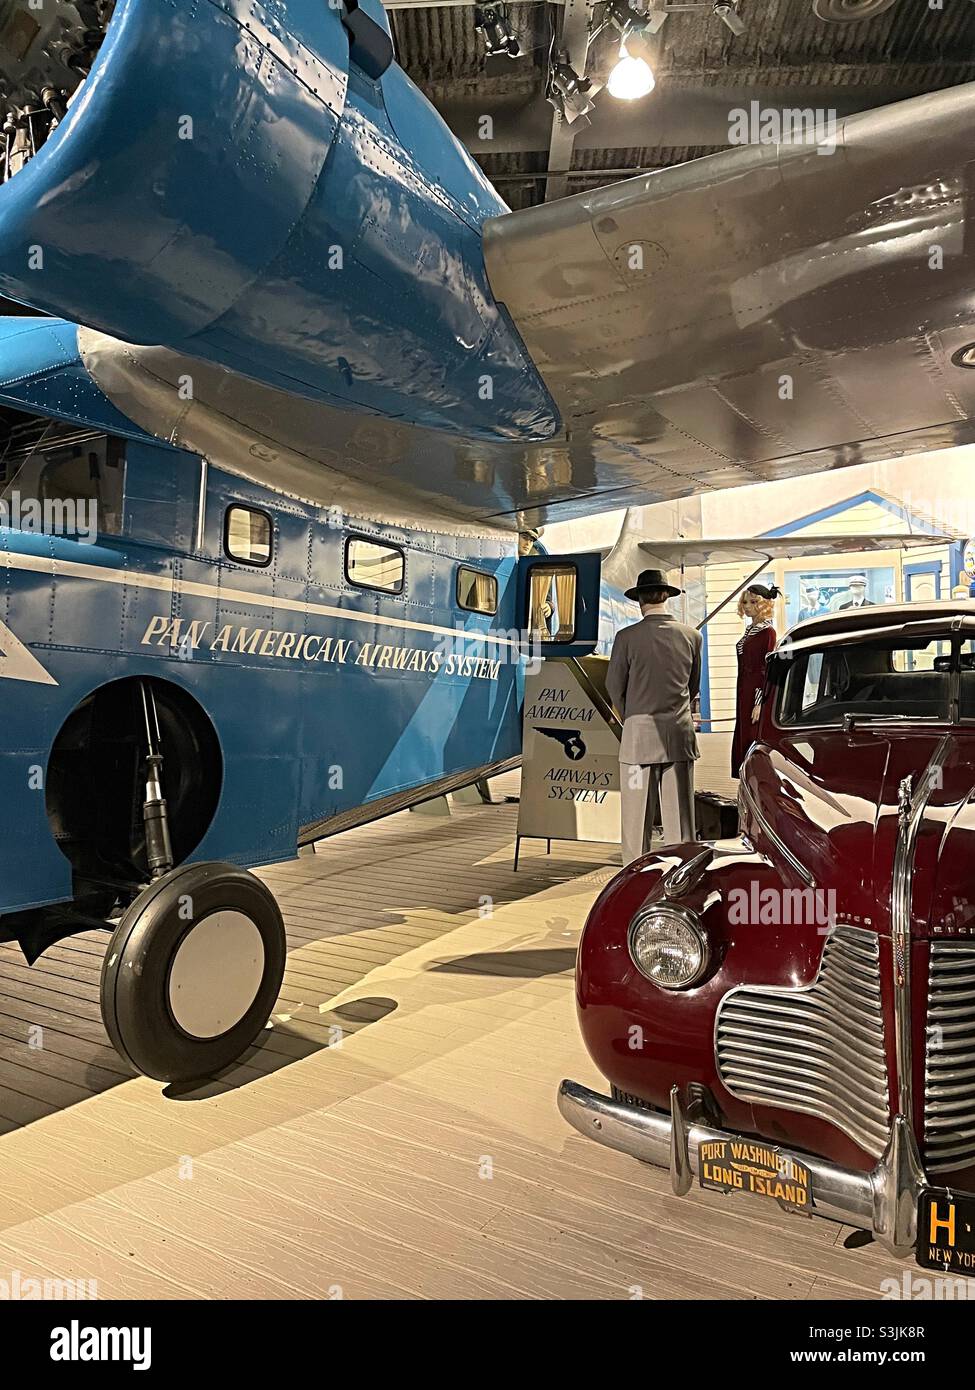 Pan-American airways display at the cradle of aviation Museum in Garden City Long Island, 2021, USA Stock Photo